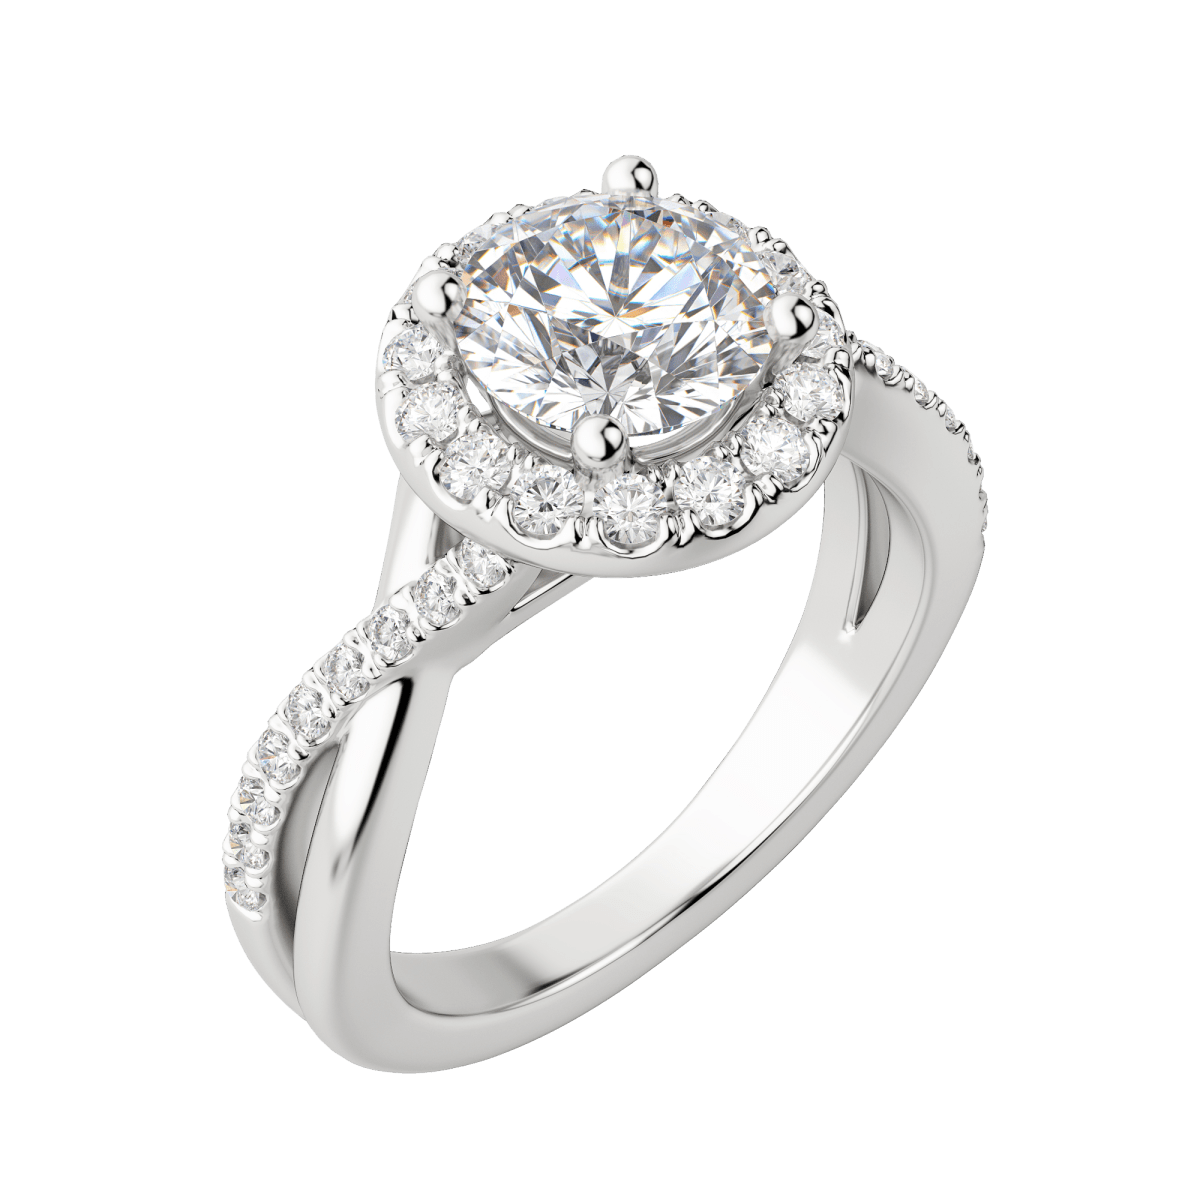 Online Engagement Ring Shopping: How to Ensure a Safe and Secure Purchase |  Diamond Registry